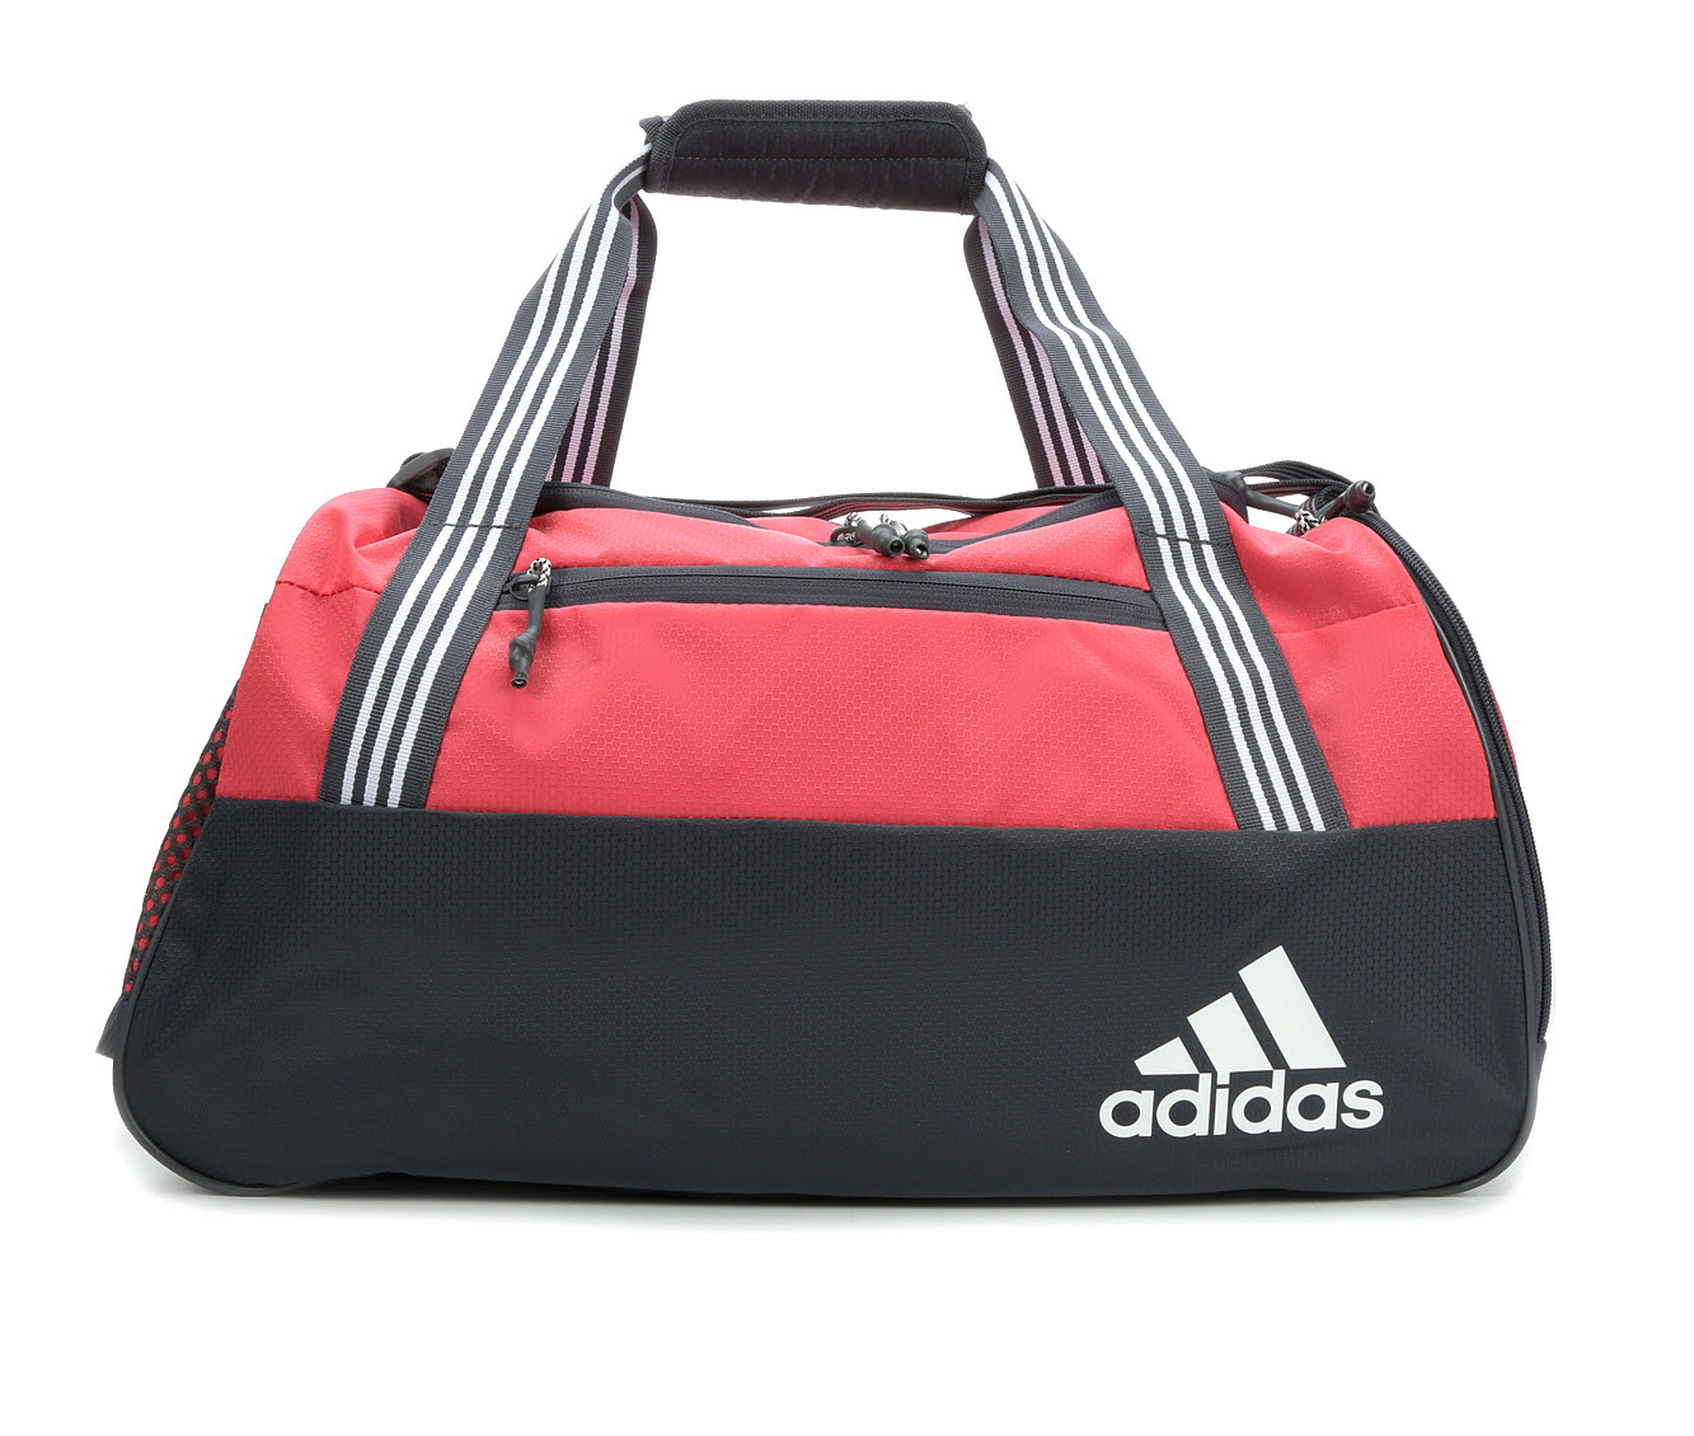 All You Need To Know About Adidas Squad Duffel Bag – Piczasso.com